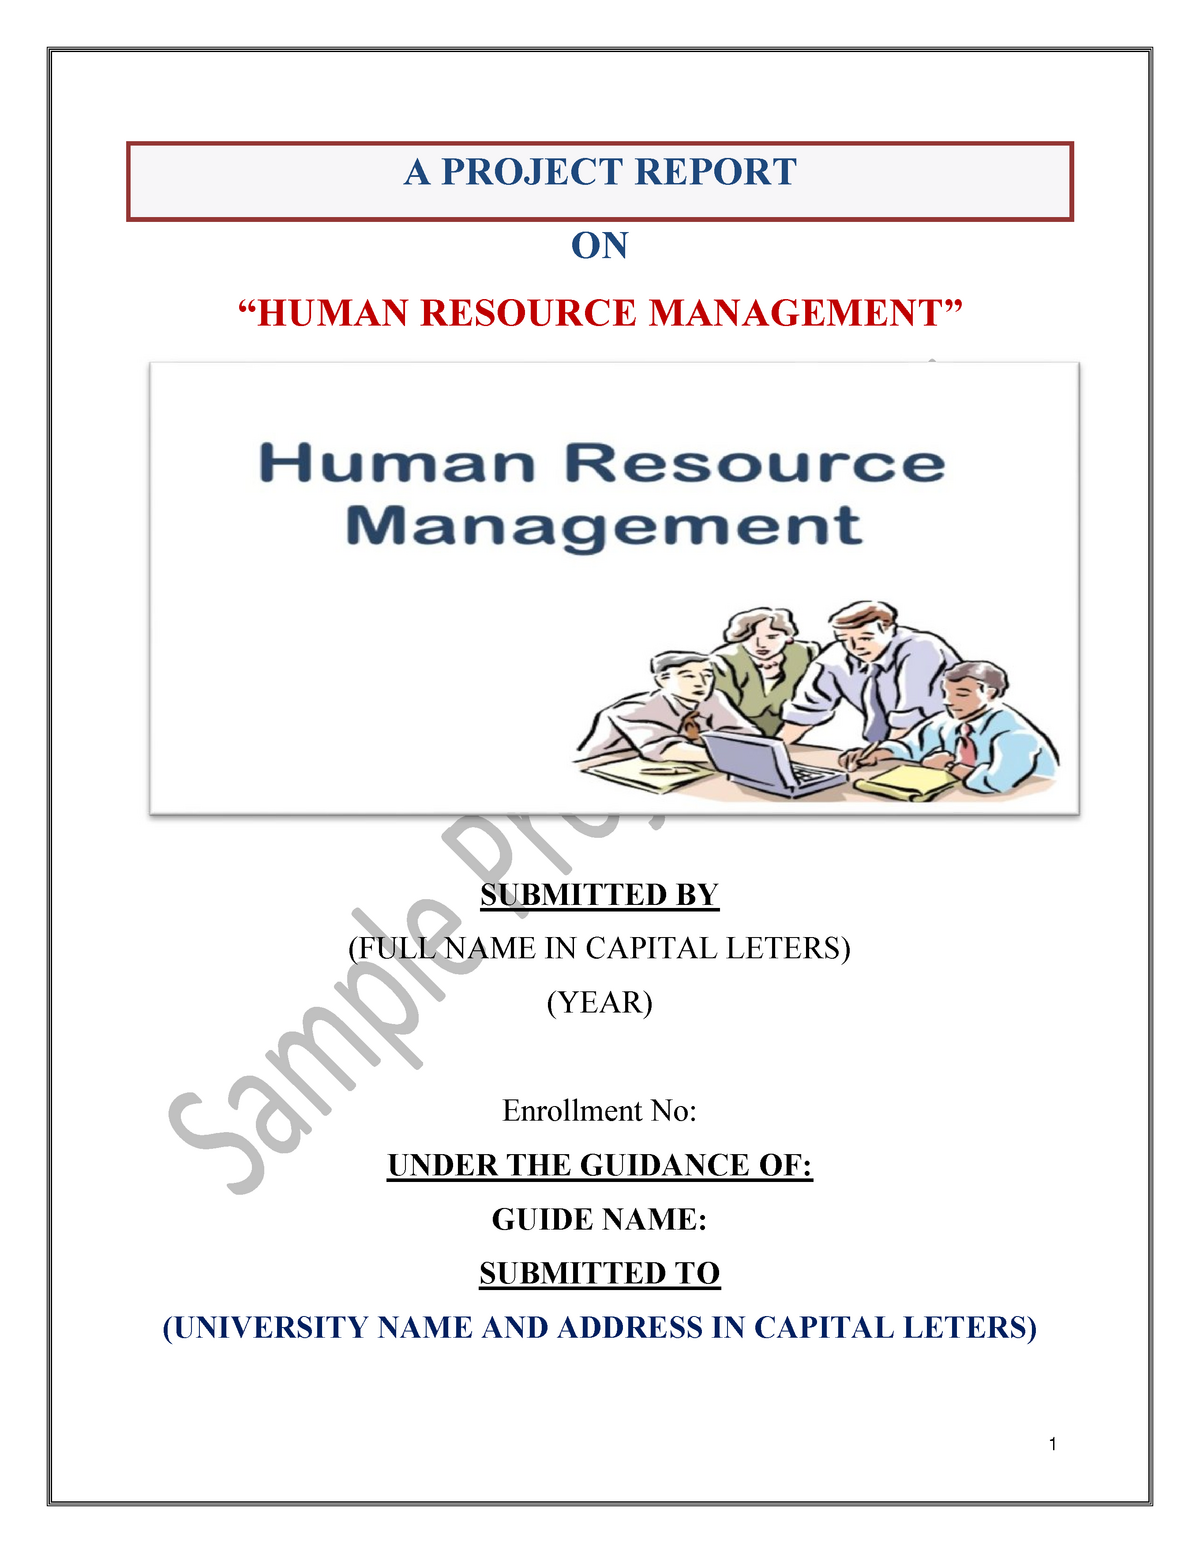 research project on human resource management